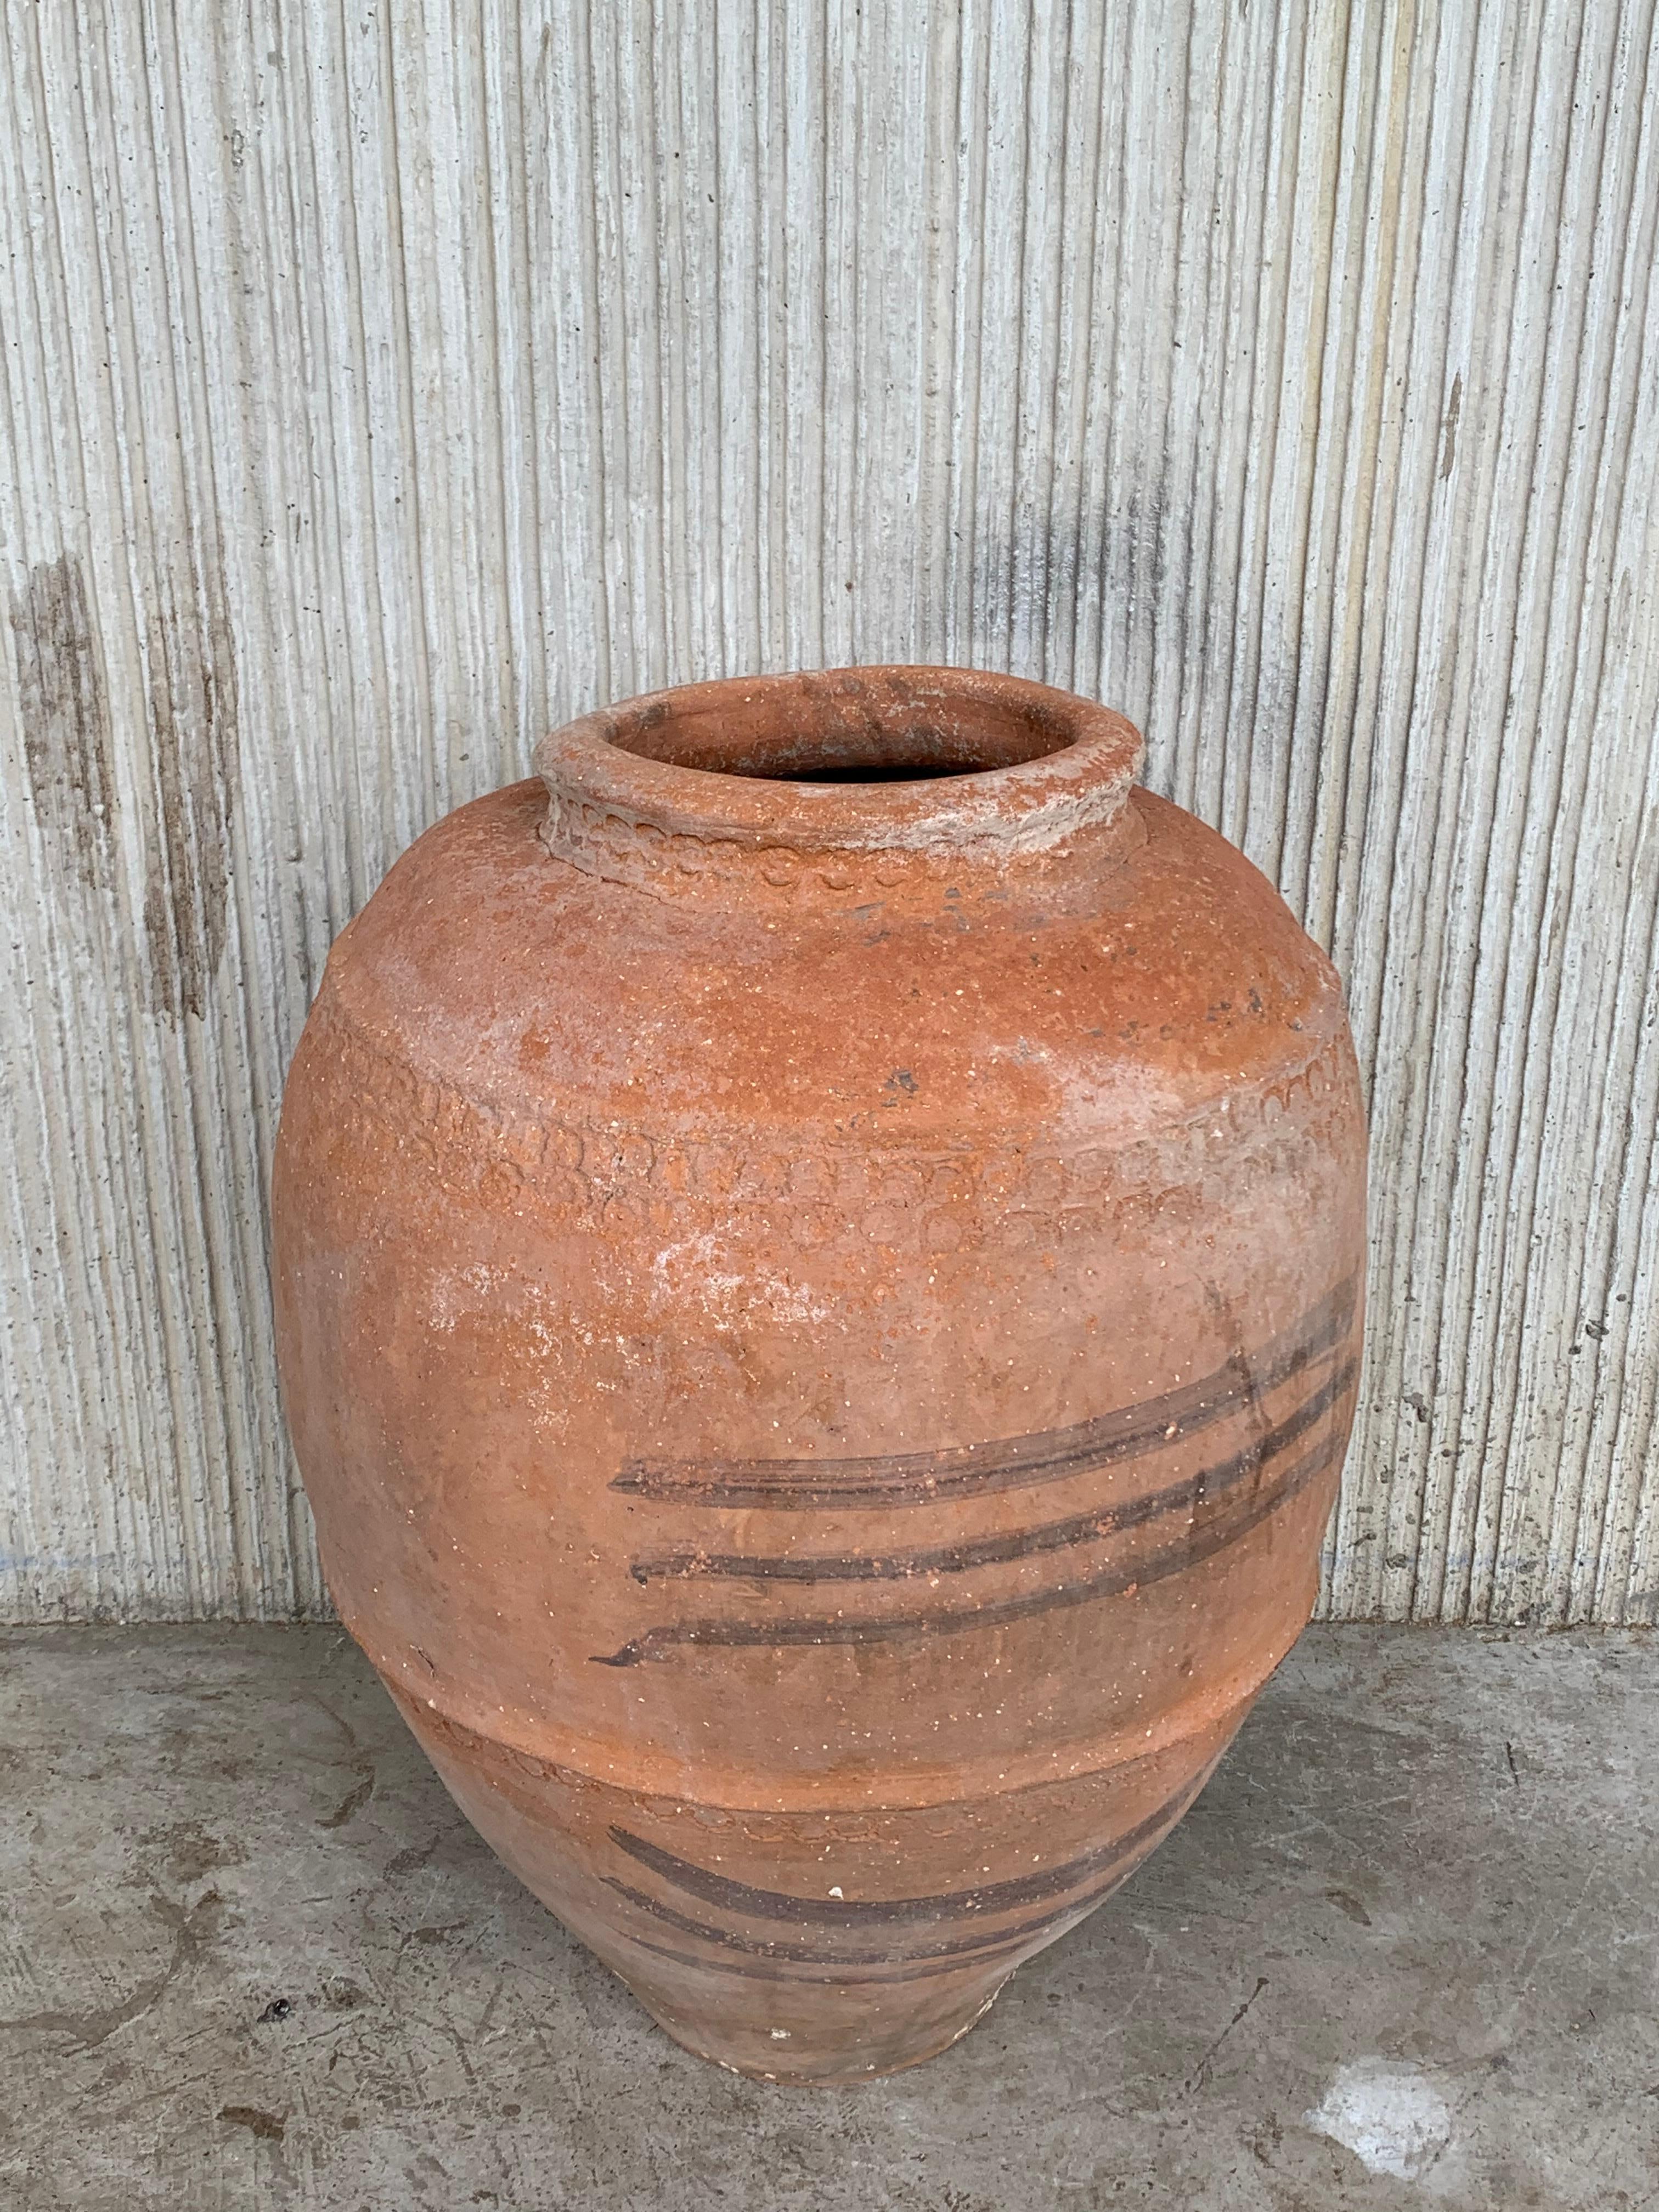 Spanish 19th Century Large Terracotta Ribbed Vessel, Vase, Planter with Low Tap